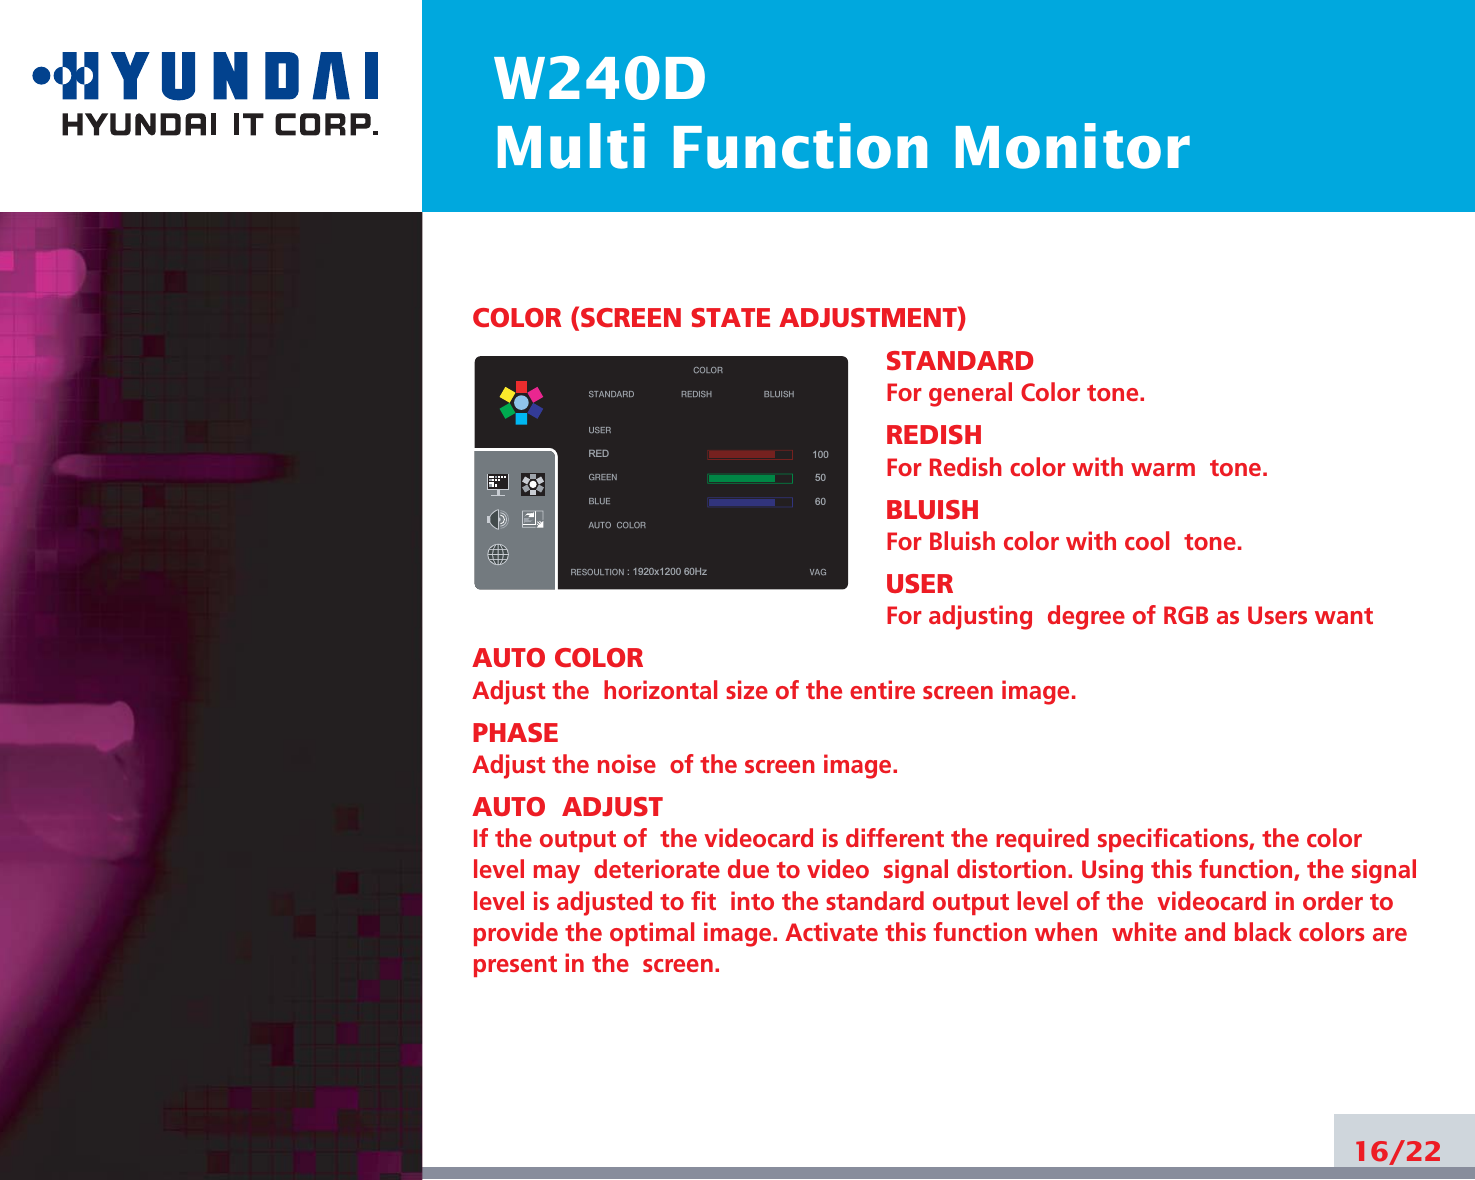 W240DMulti Function Monitor16/22COLOR (SCREEN STATE ADJUSTMENT)STANDARDFor general Color tone.REDISHFor Redish color with warm  tone.BLUISHFor Bluish color with cool  tone.USERFor adjusting  degree of RGB as Users wantAUTO COLORAdjust the  horizontal size of the entire screen image.PHASEAdjust the noise  of the screen image.AUTO  ADJUSTIf the output of  the videocard is different the required specifications, the colorlevel may  deteriorate due to video  signal distortion. Using this function, the signallevel is adjusted to fit  into the standard output level of the  videocard in order toprovide the optimal image. Activate this function when  white and black colors arepresent in the  screen.STANDARDUSERRED GREEN BLUE AUTOCOLOR REDISH BLUISHRESOULTION : 1920x1200 60Hz VAGCOLOR1005060